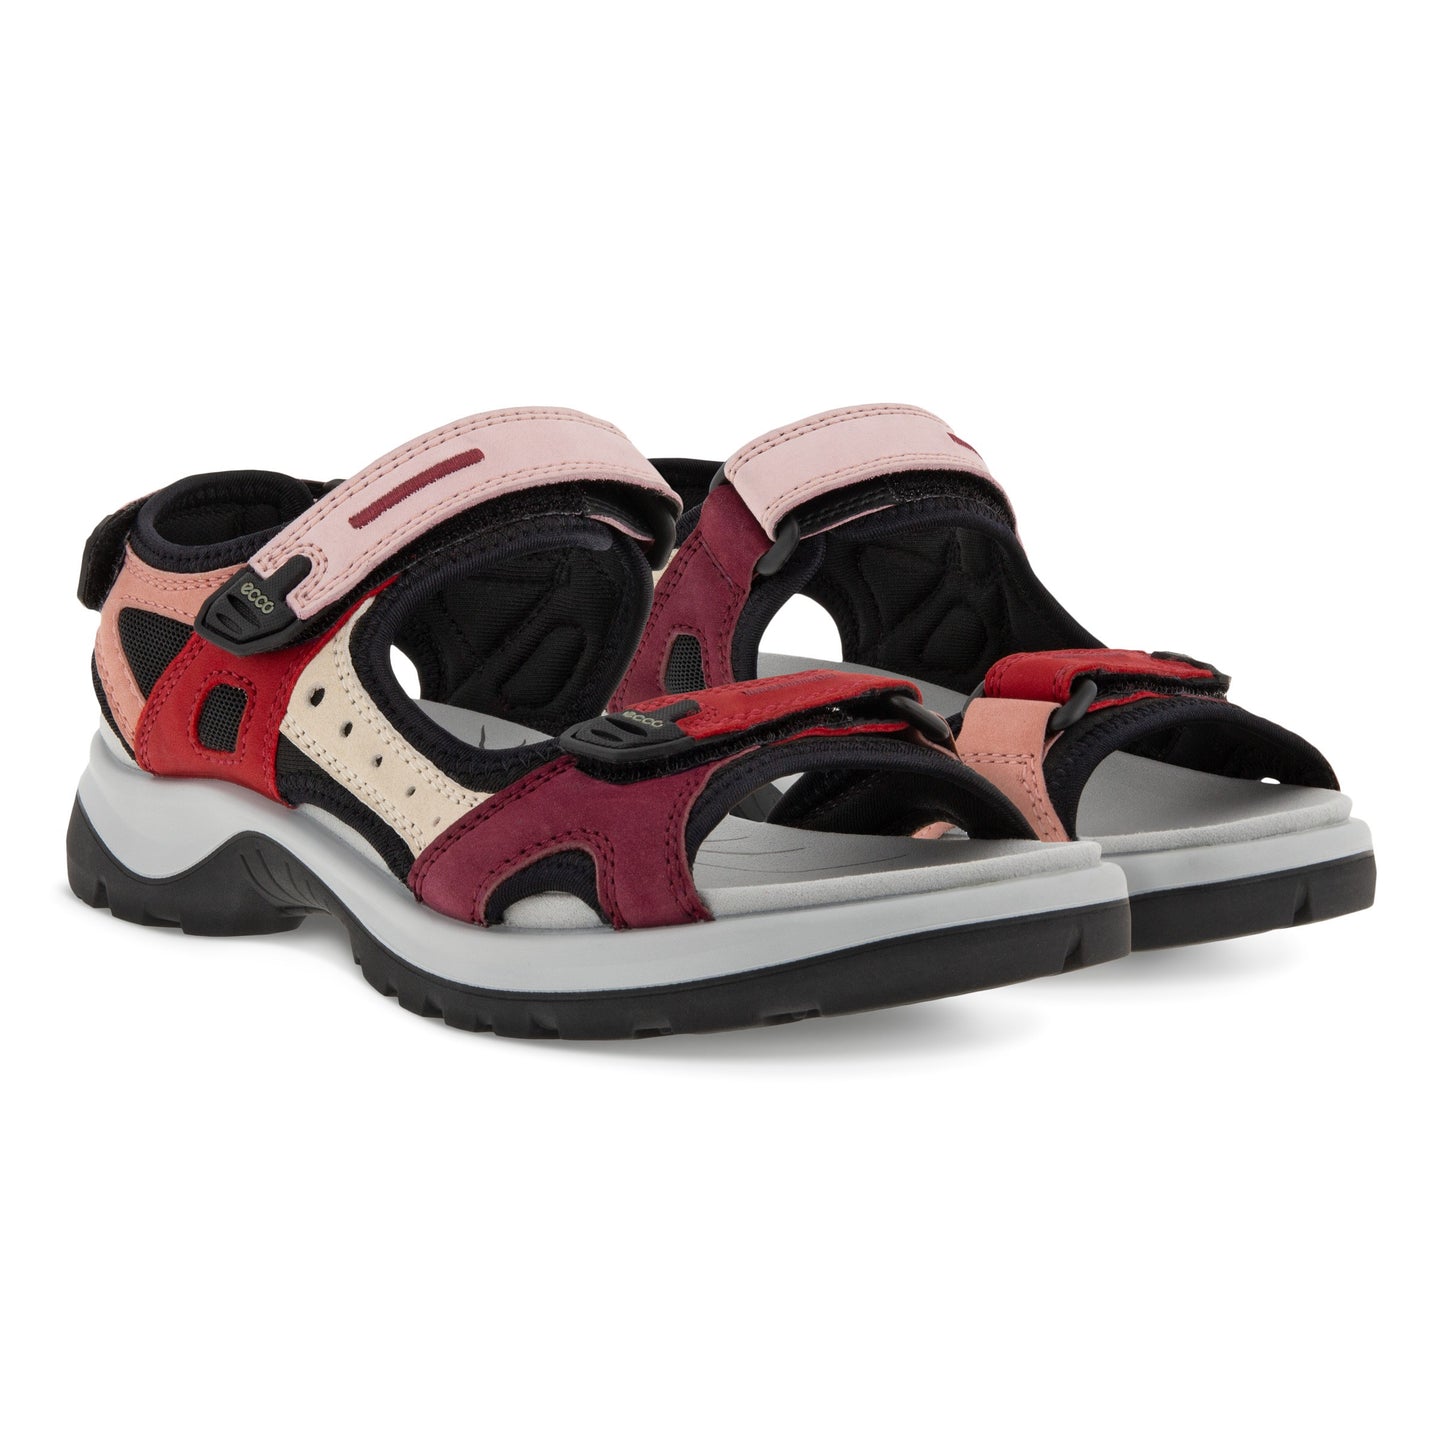 two red sandals 3/4 view ECCO Women's Offroad - Multicolor Chili Red